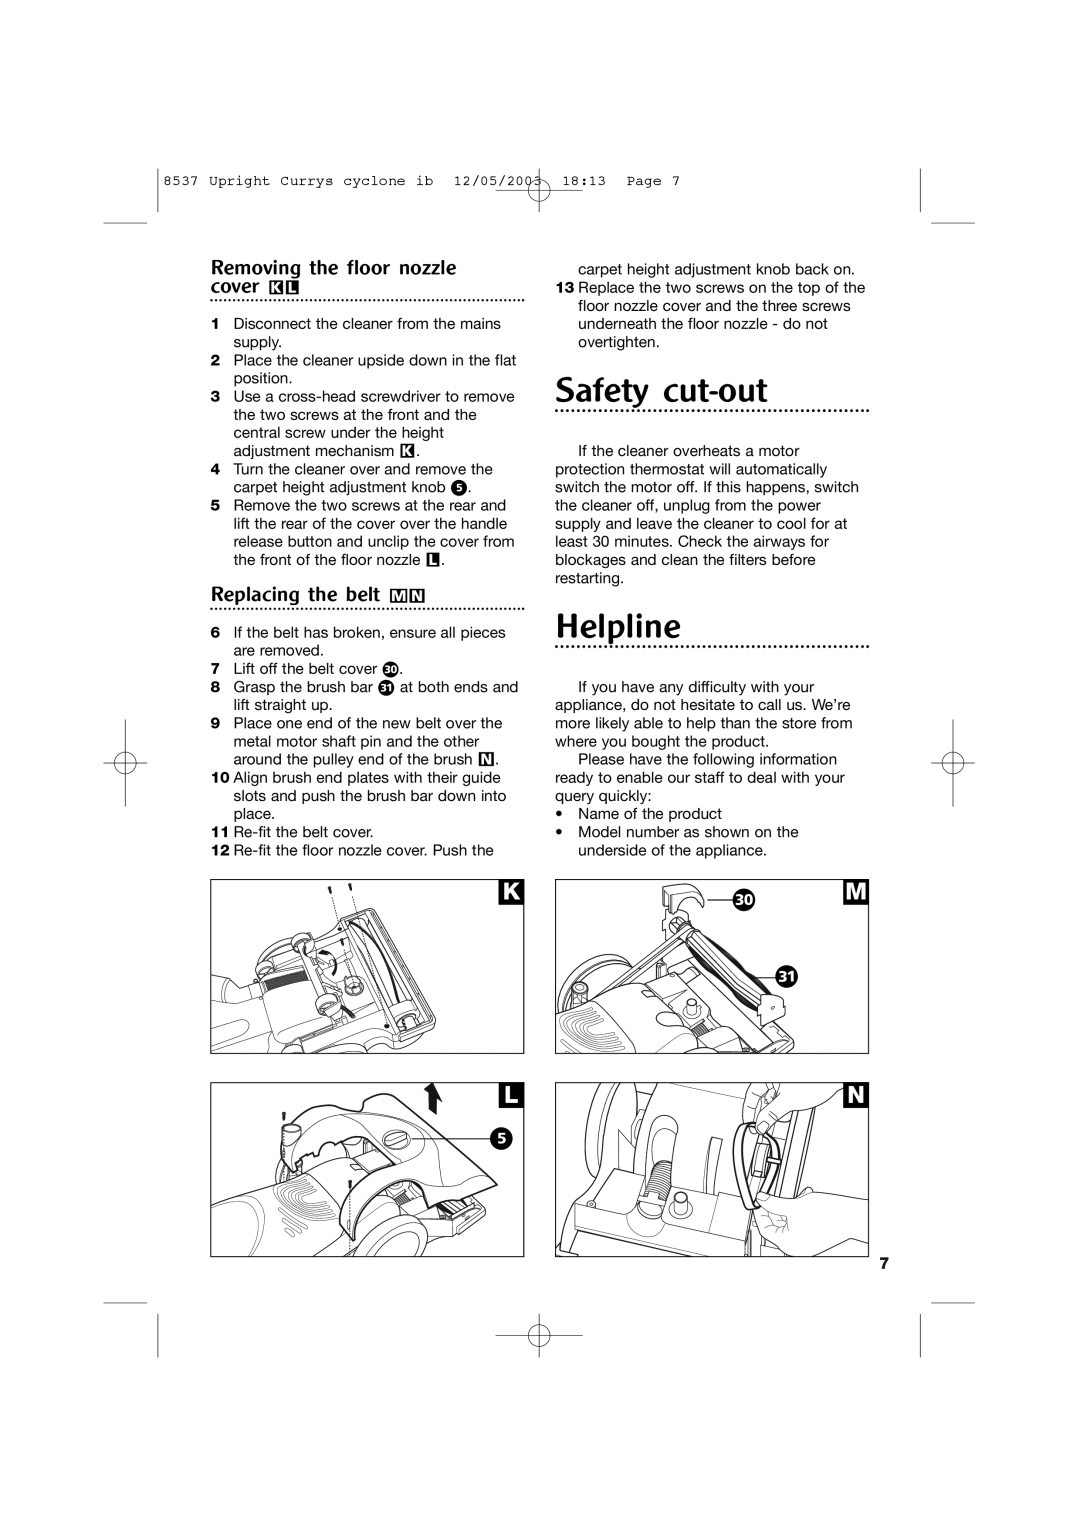 Morphy Richards 73313 manual Safety cut-out, Helpline, Removing the floor nozzle cover KL, Replacing the belt MN, ˜ M ¯ 